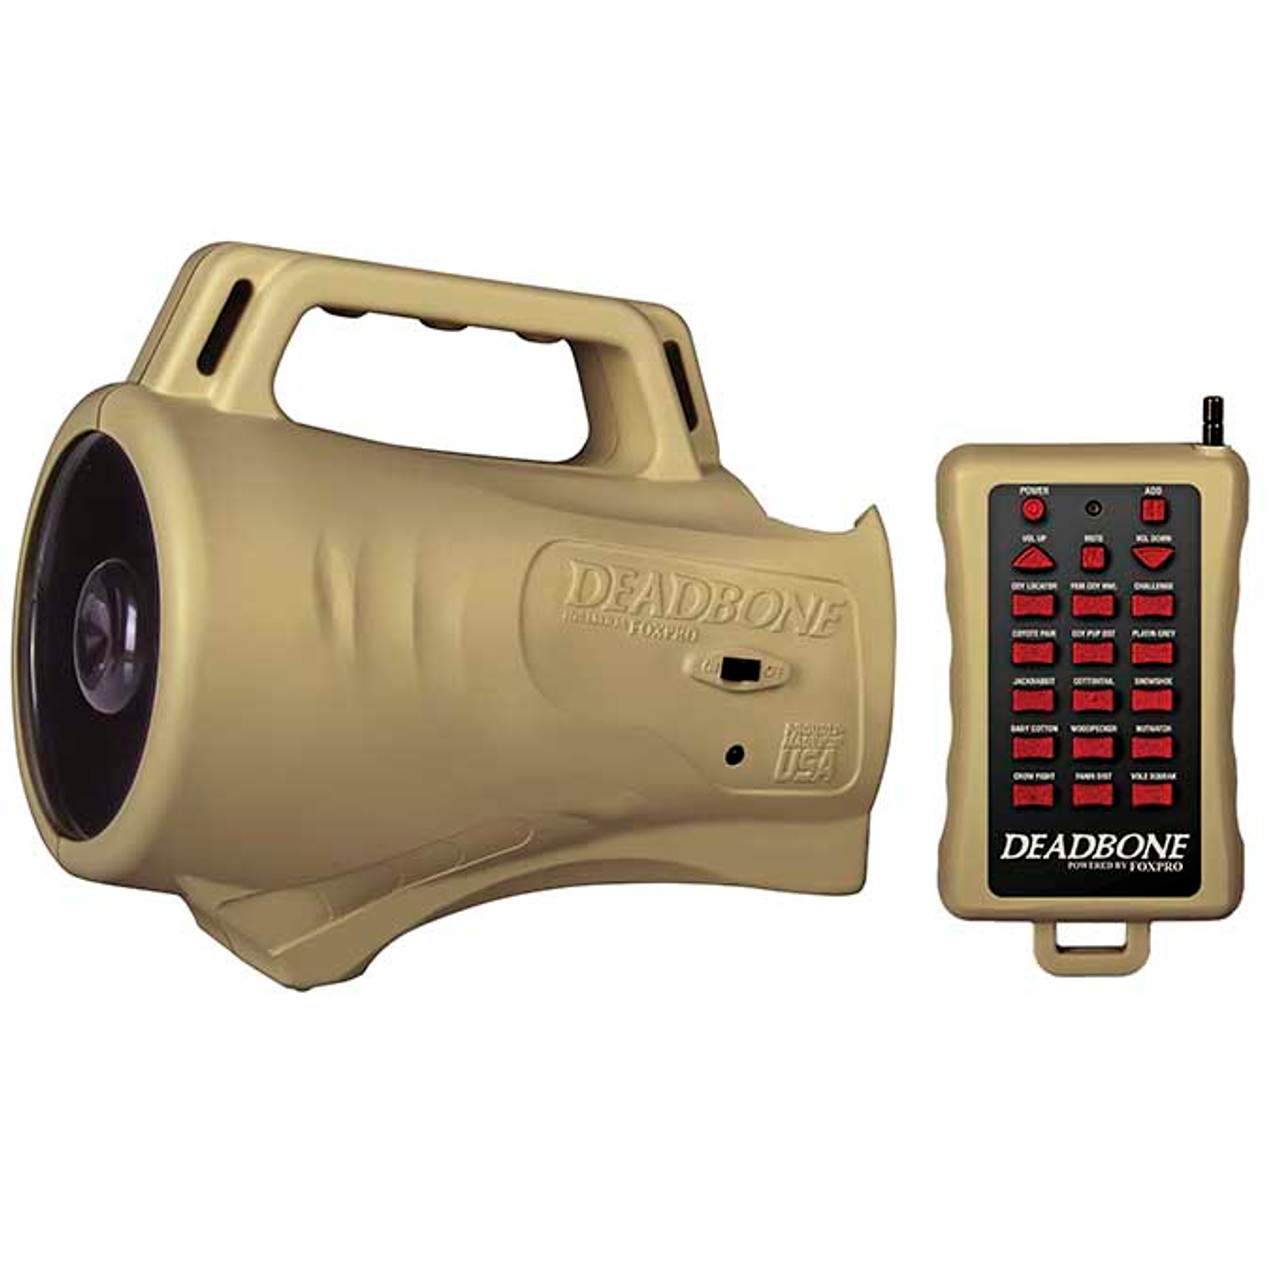 FoxPro Deadbone Electronic Predator Game Call with Remote